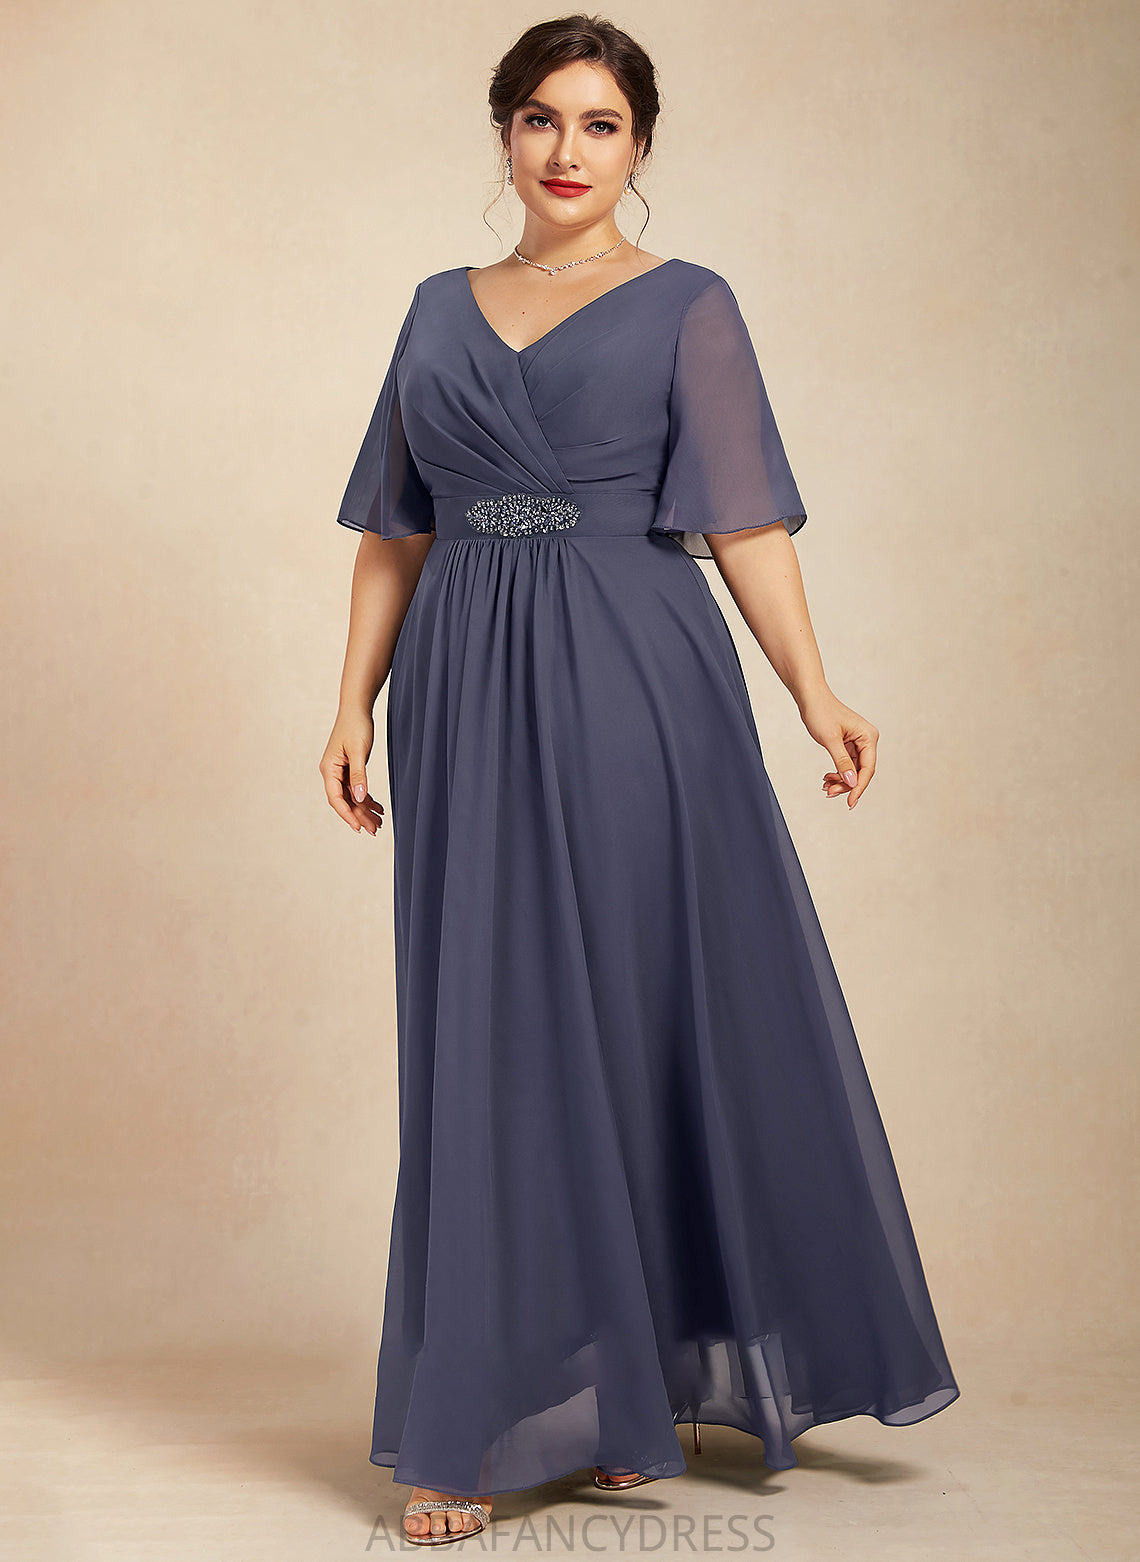 Jaylah the A-Line Mother Mother of the Bride Dresses Ankle-Length Beading Chiffon of Dress Ruffle With V-neck Bride Sequins